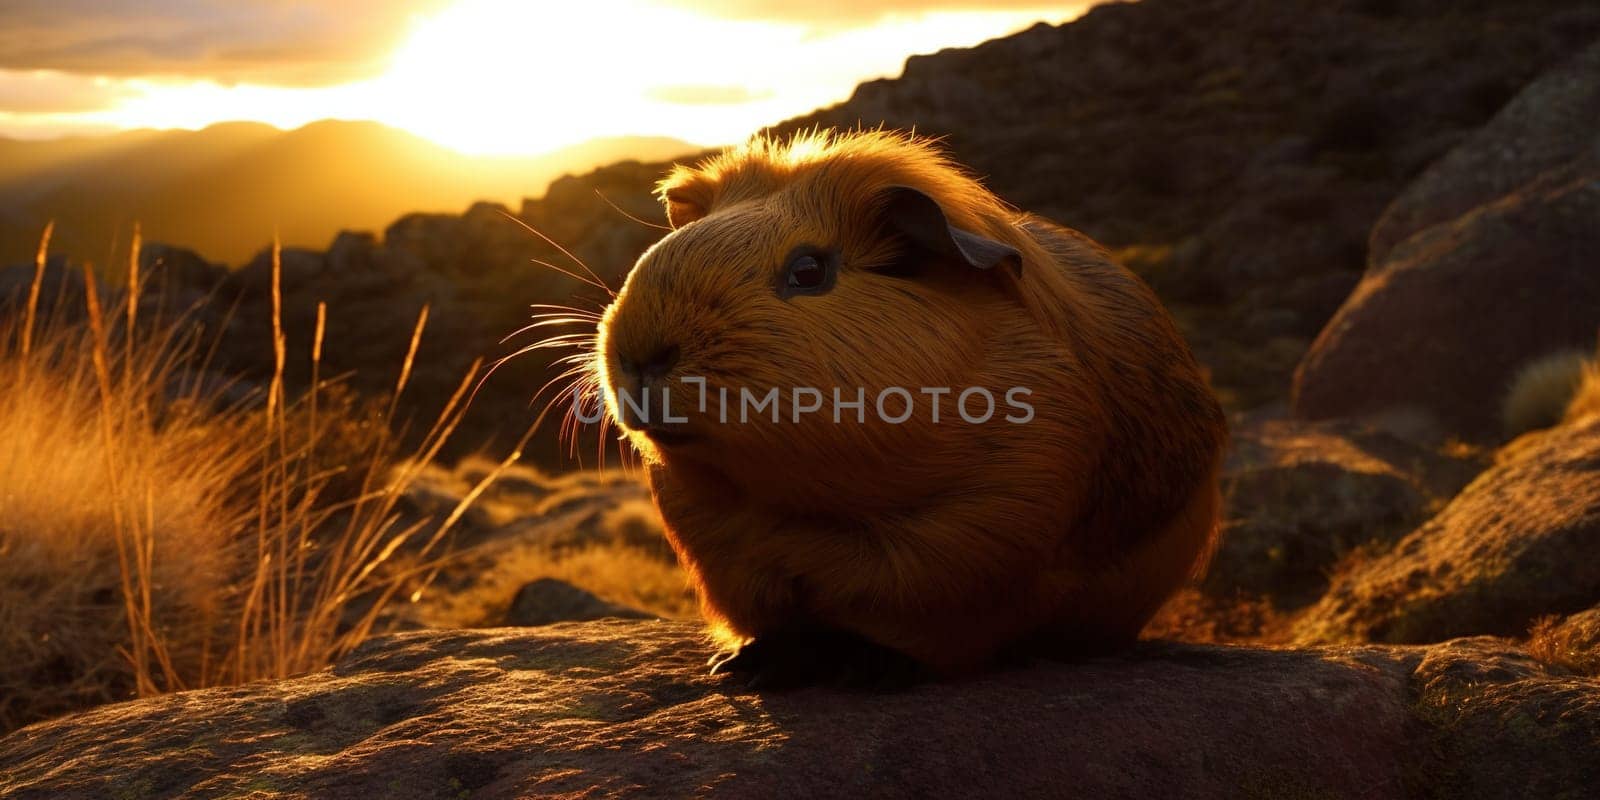 Cute Guinea Pig On A Ground At Sunset, Close Up by GekaSkr